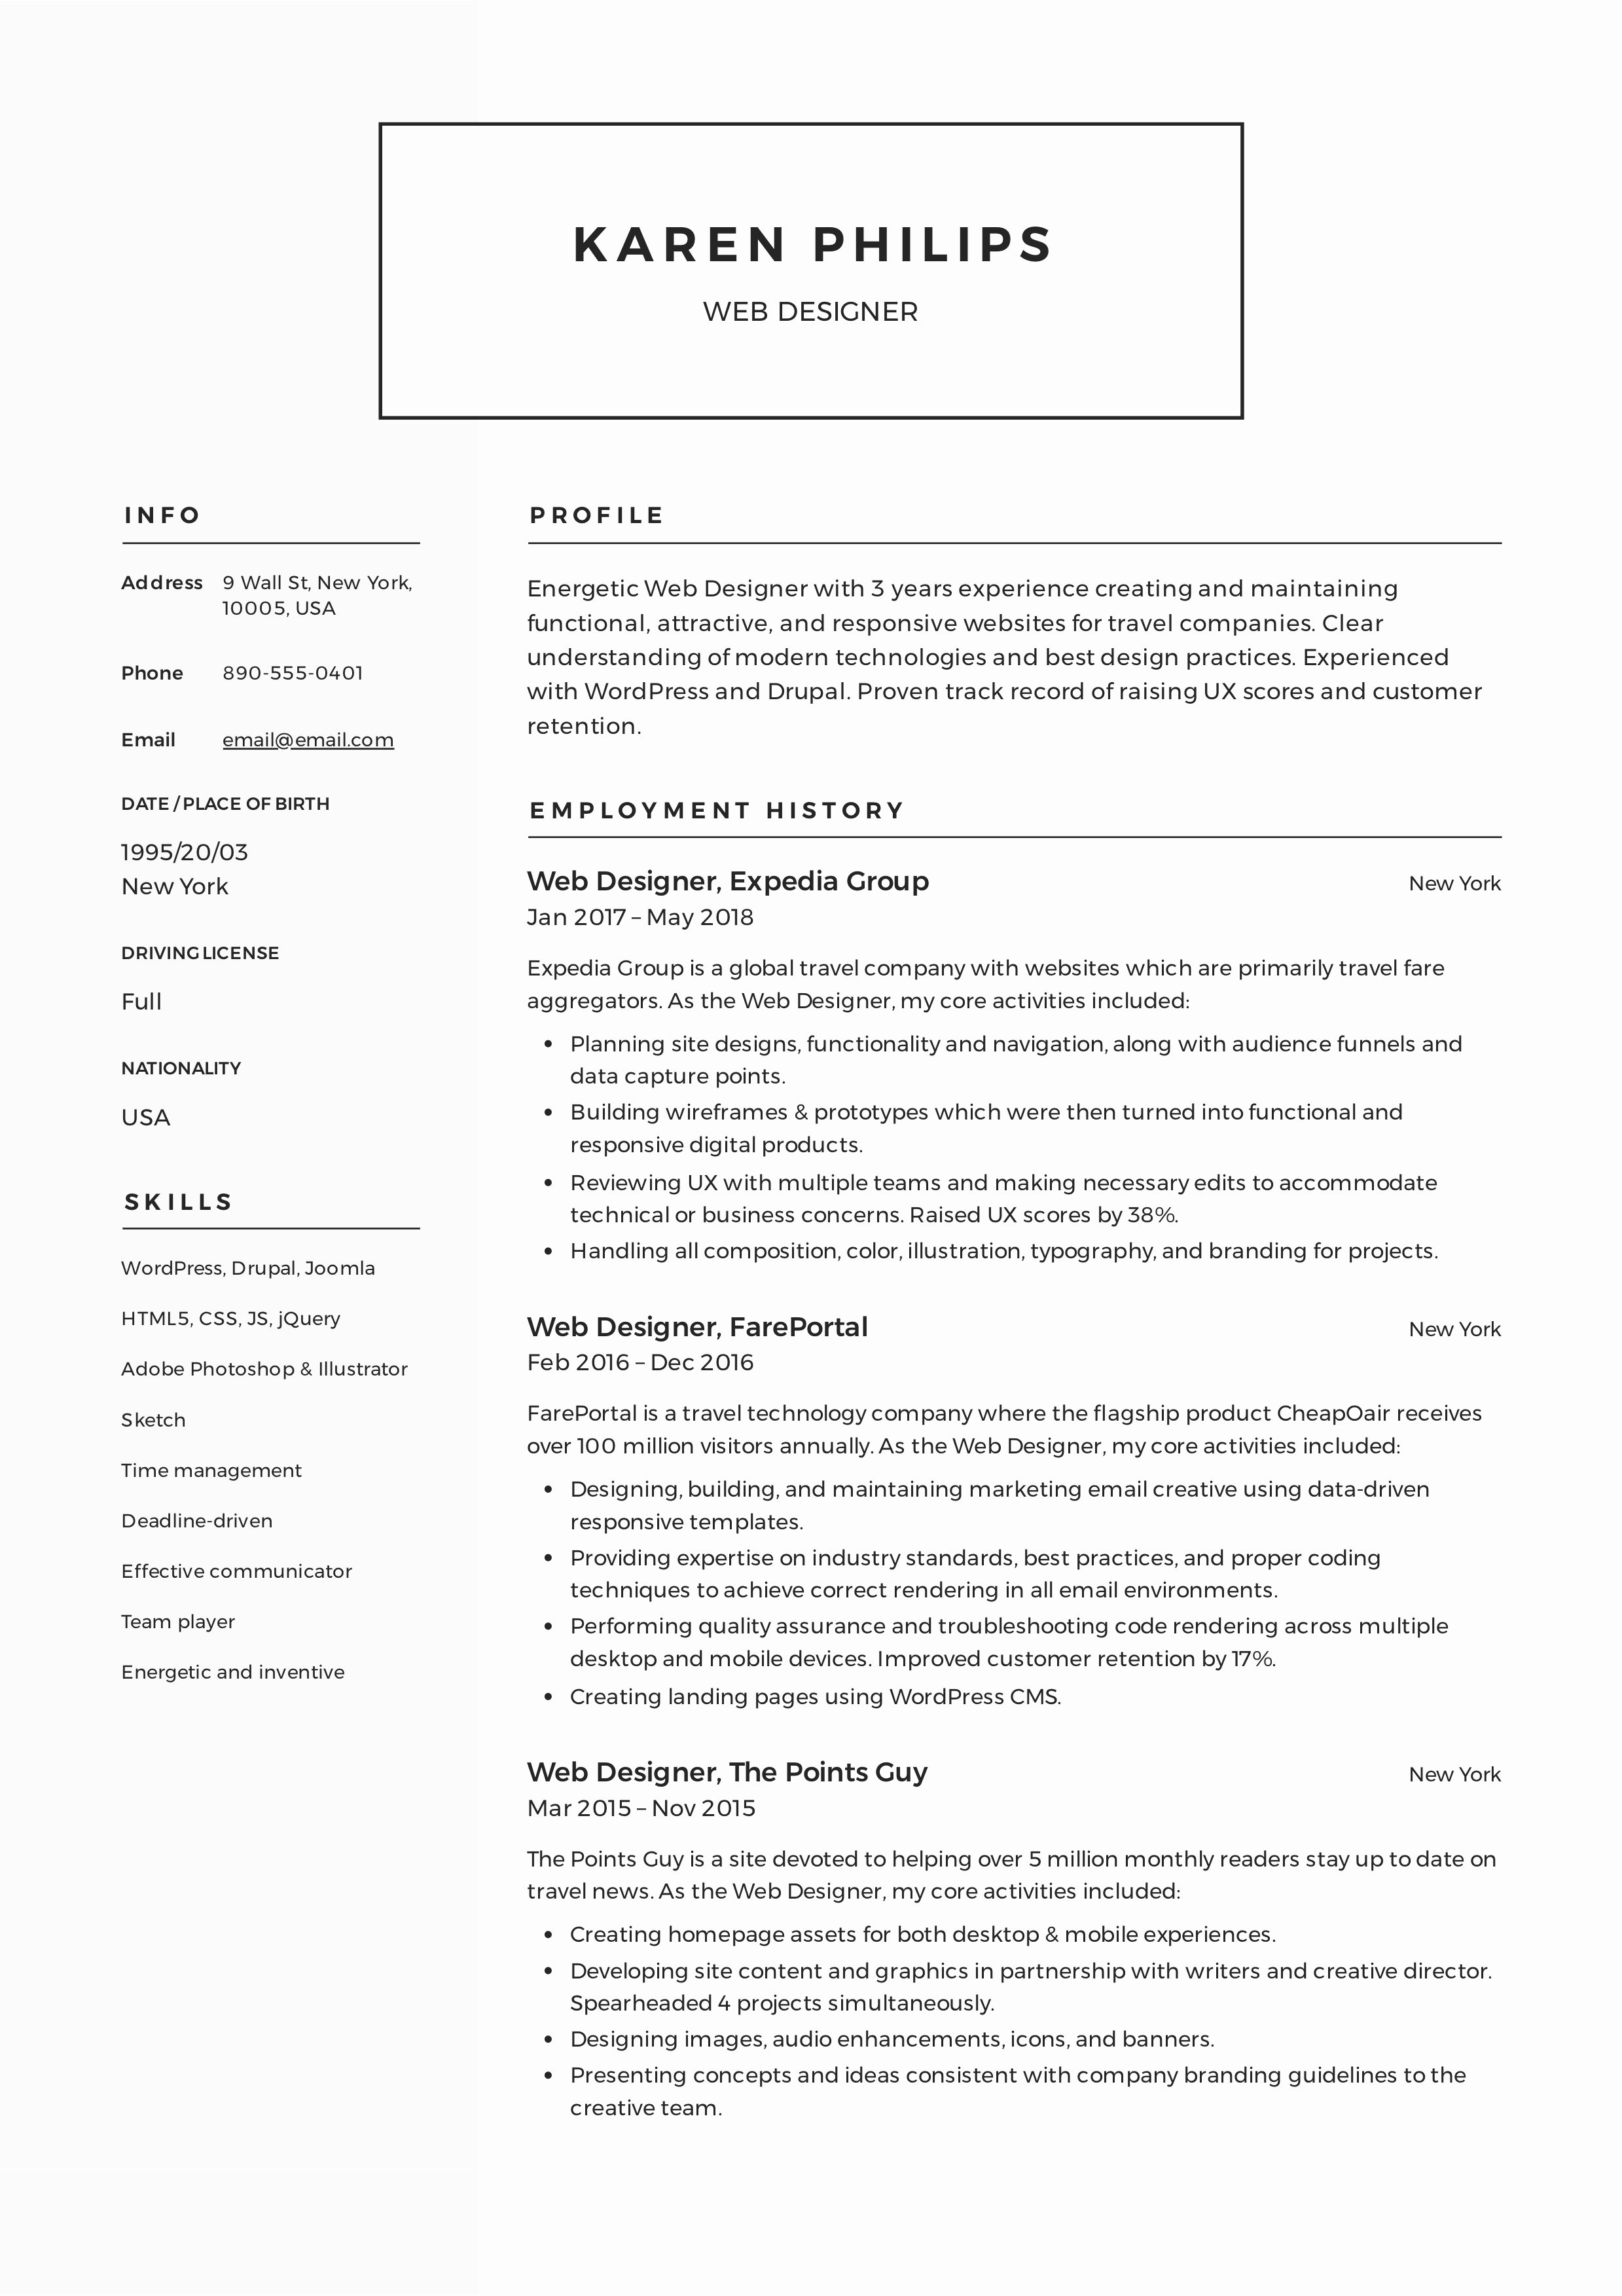 Free Resume Templates Pdf Awesome Resume Templates [2019] Pdf and Word